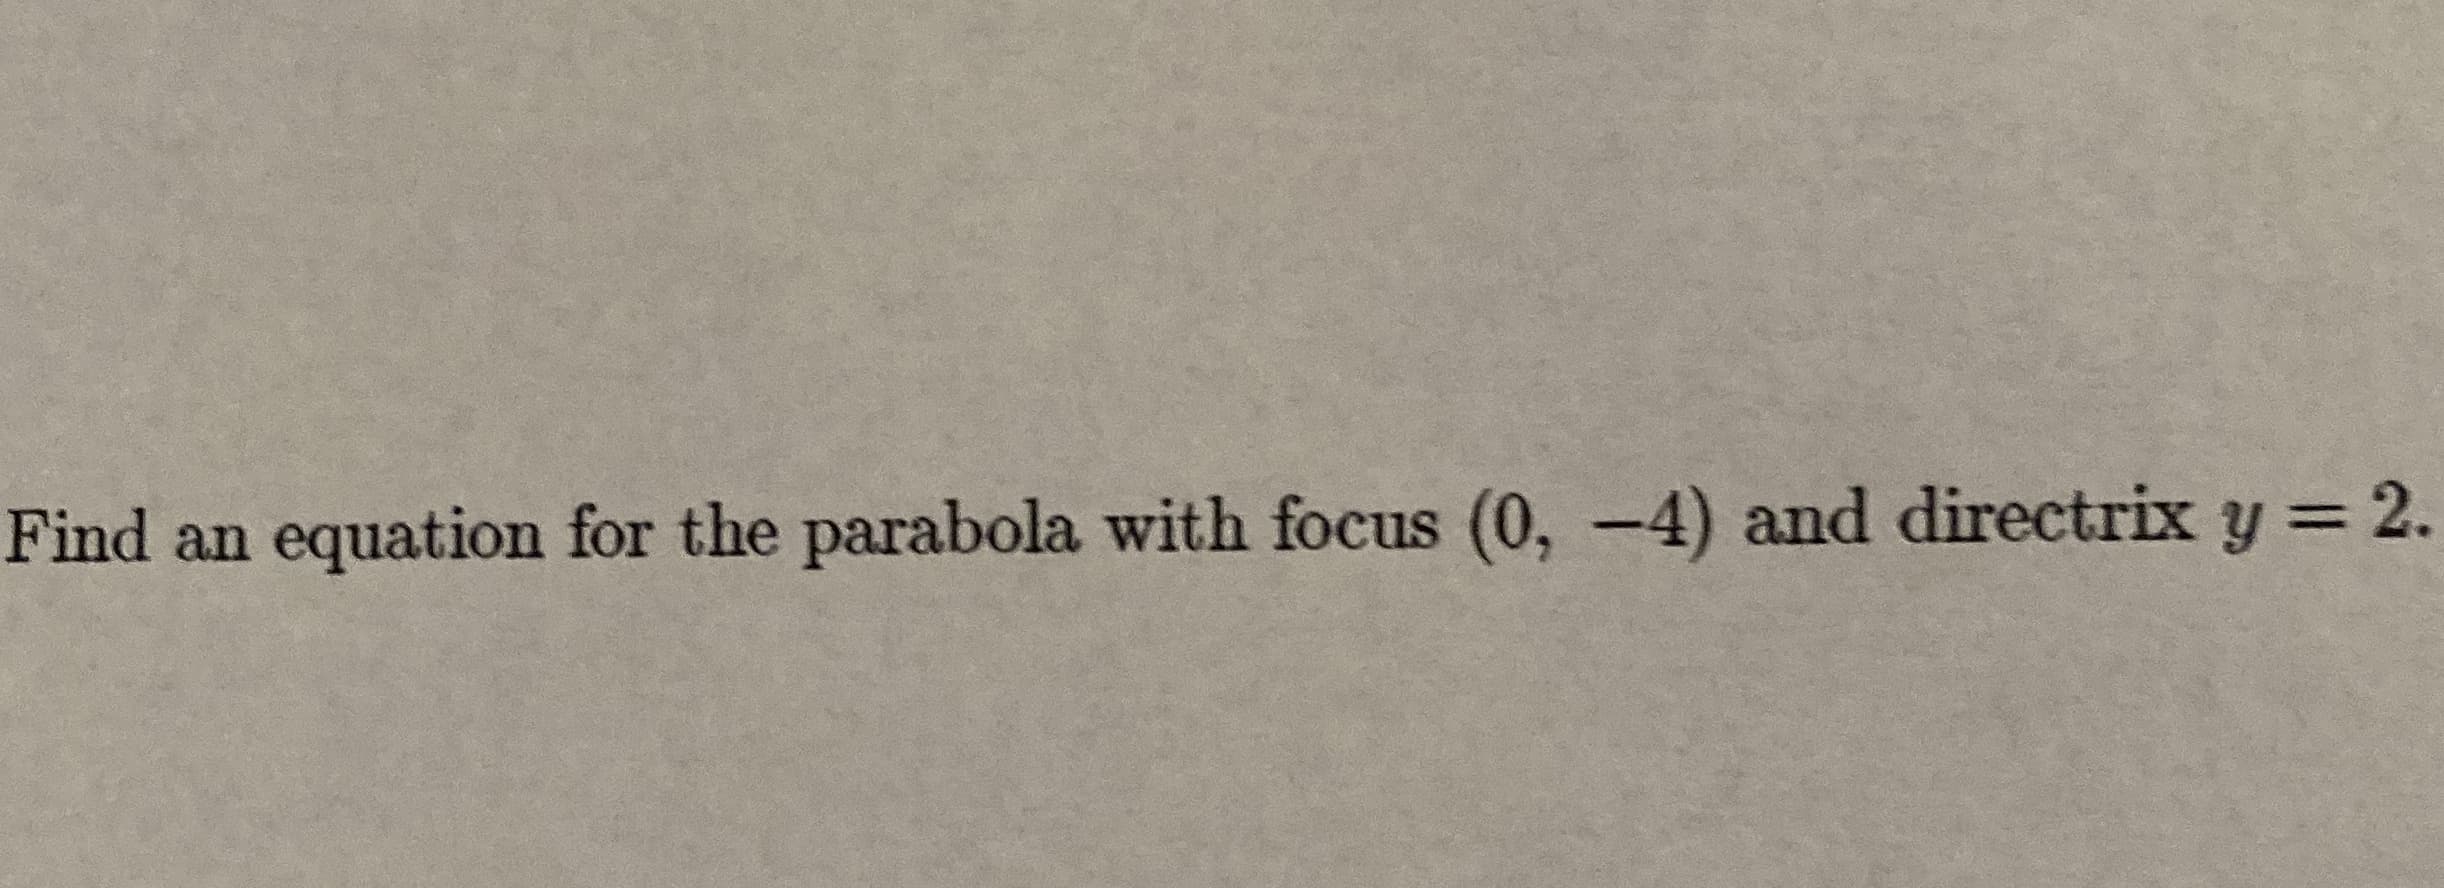 Find an equation for the parabola with focus (0, -4) and directrix y =
